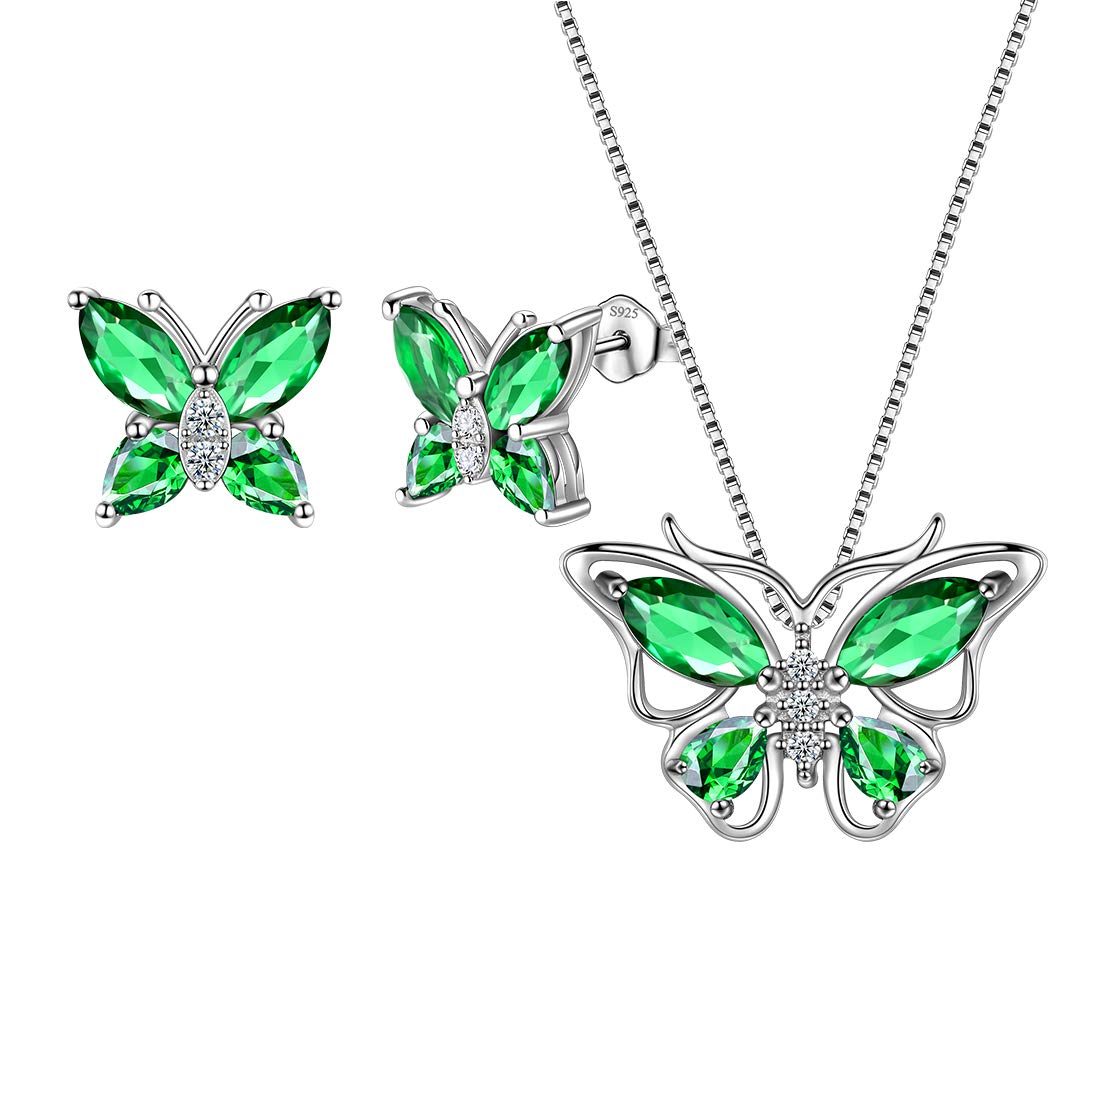 Gren Butterfly Jewelry Emerald May Birthstone Jewelry Set Fine Necklace/Earrings 925 Sterling Silver Women Girls Birthday Mother's Day Gifts - image 1 of 9